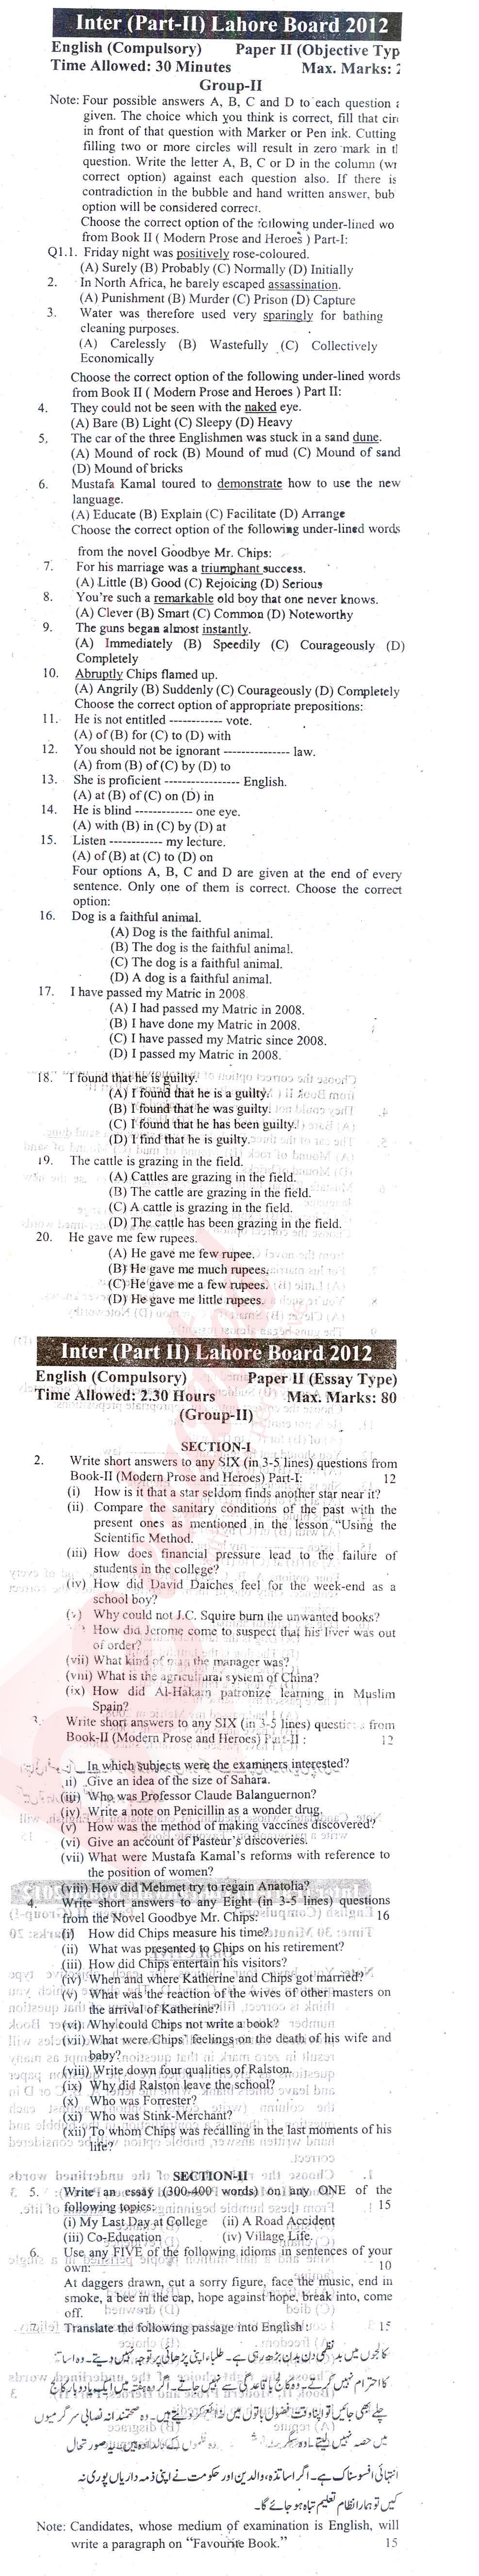 English 12th class Past Paper Group 2 BISE Lahore 2012